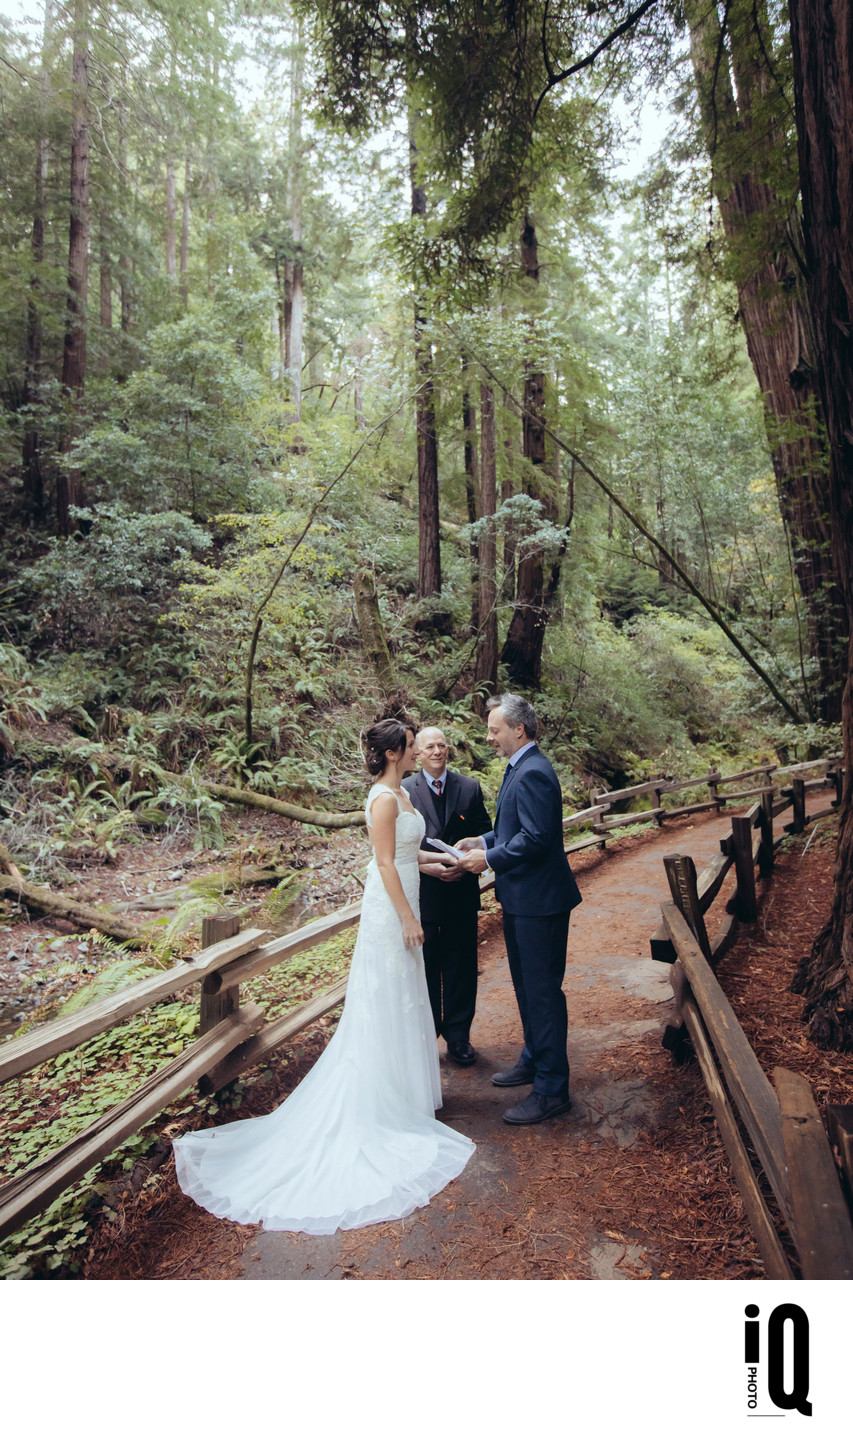 Intimate Ceremony at Muir Woods